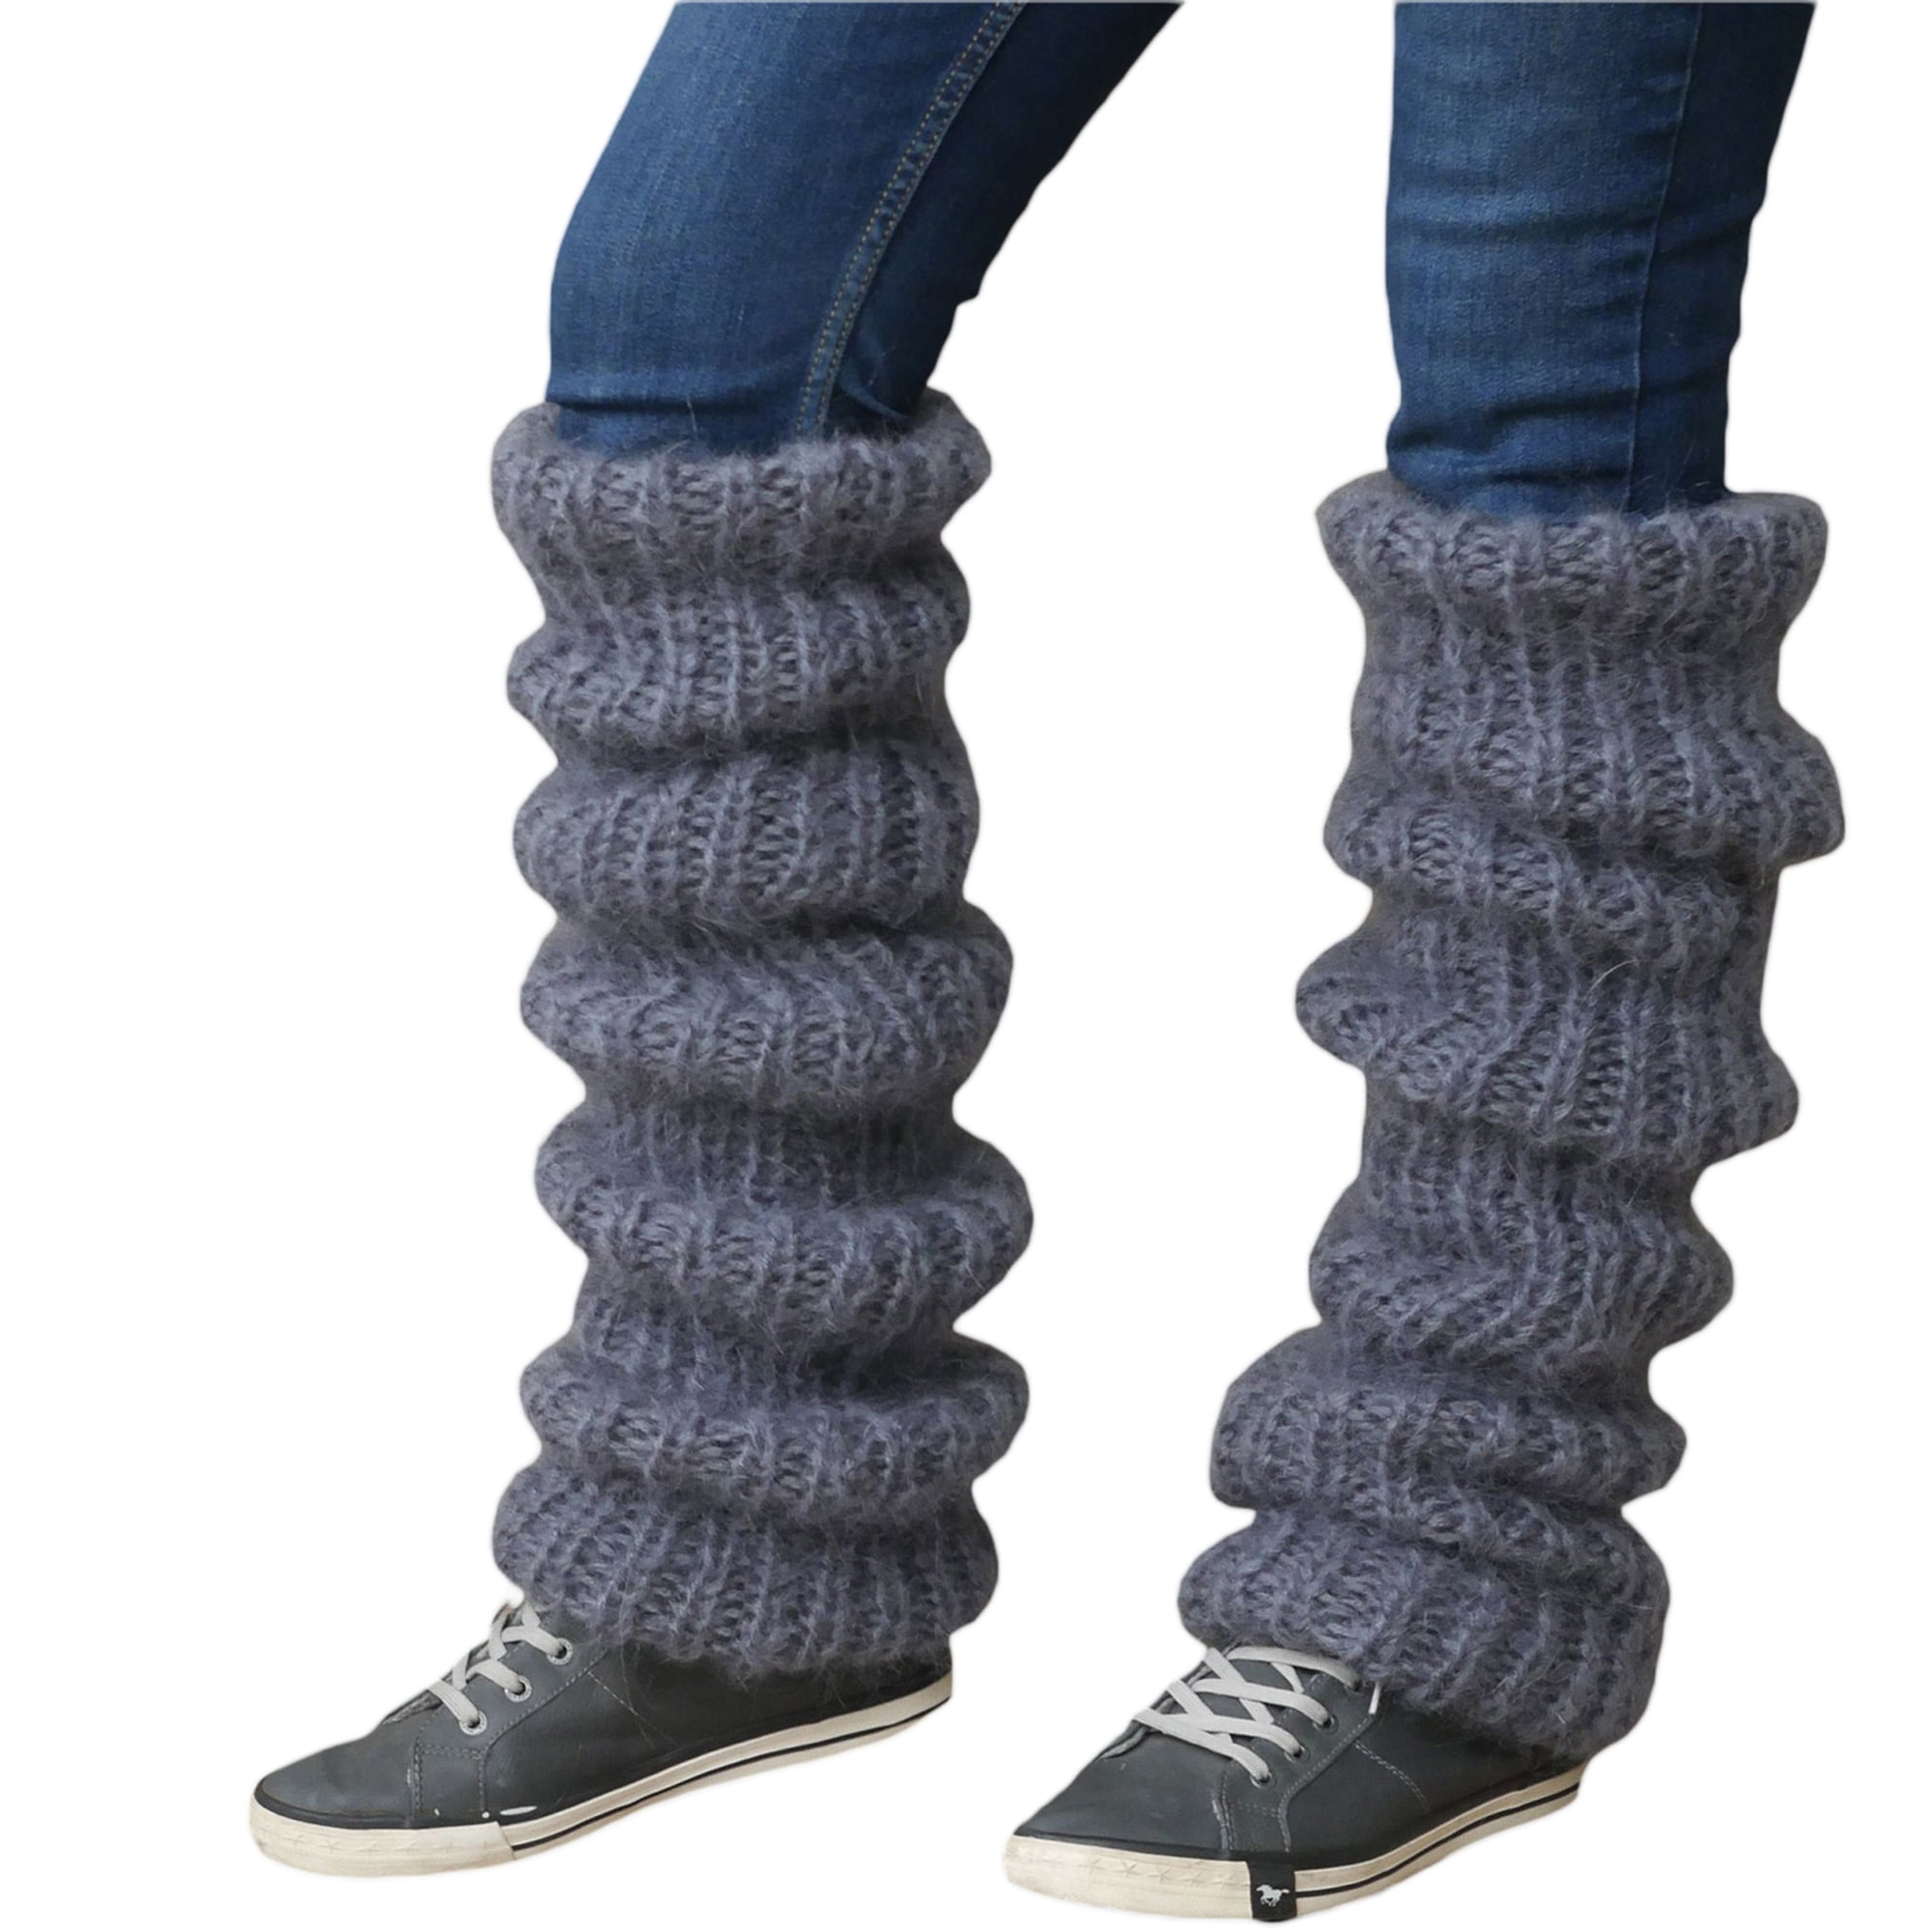 Leg Warmers for Women 80s Ribbed Knitted Leg Warmers Sports Dance